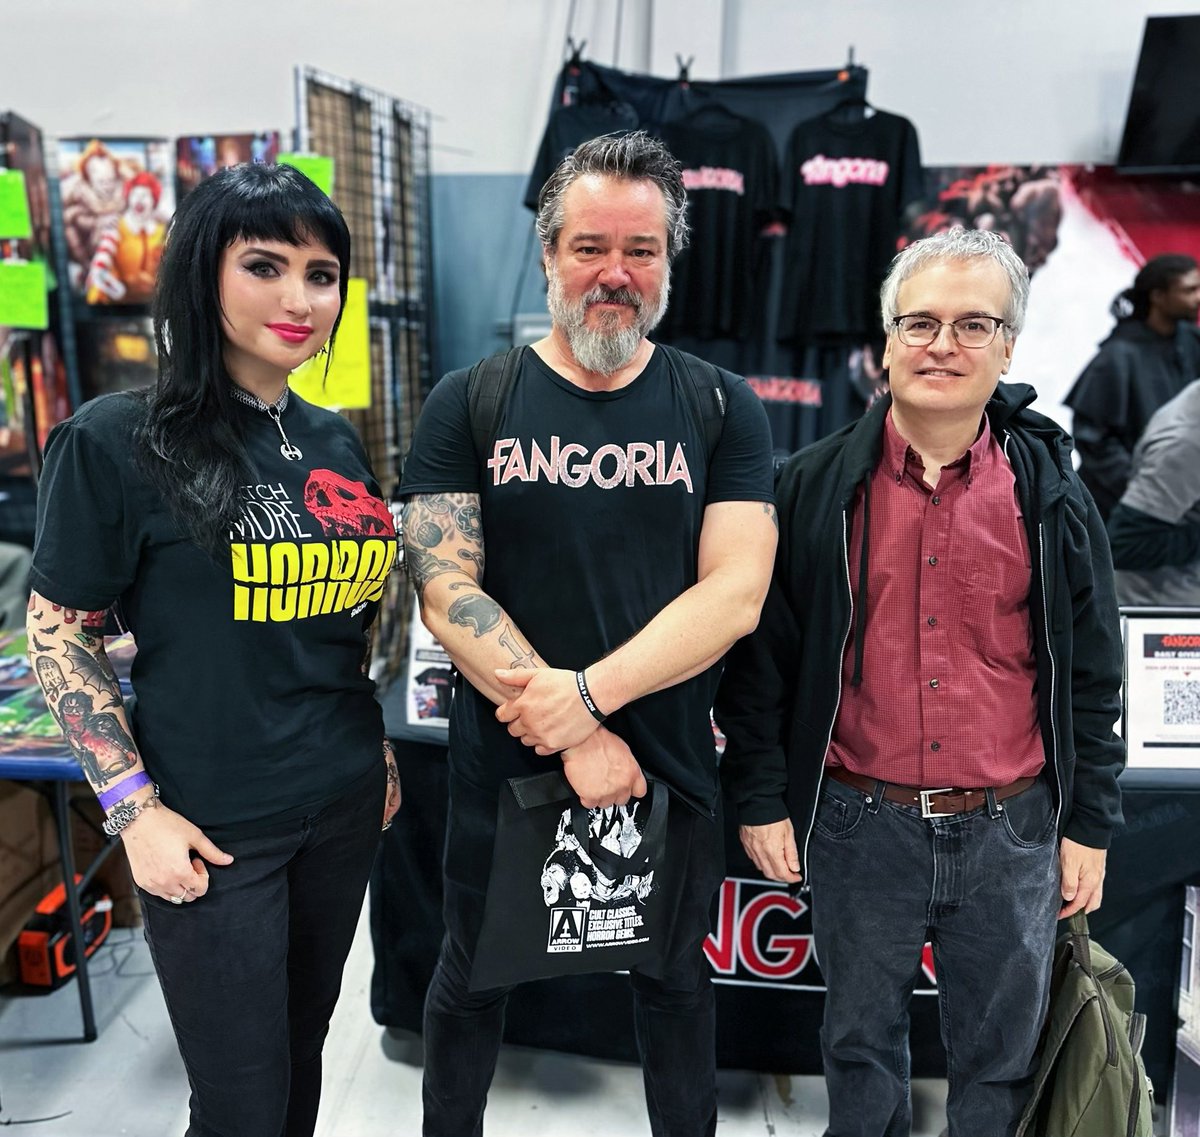 FANGORIA at large. By sheer luck, the  latest member of Team Fango Perry Tripp and Fango legend Michael Gingold both visited the booth Saturday at #njhorrorcon ✨